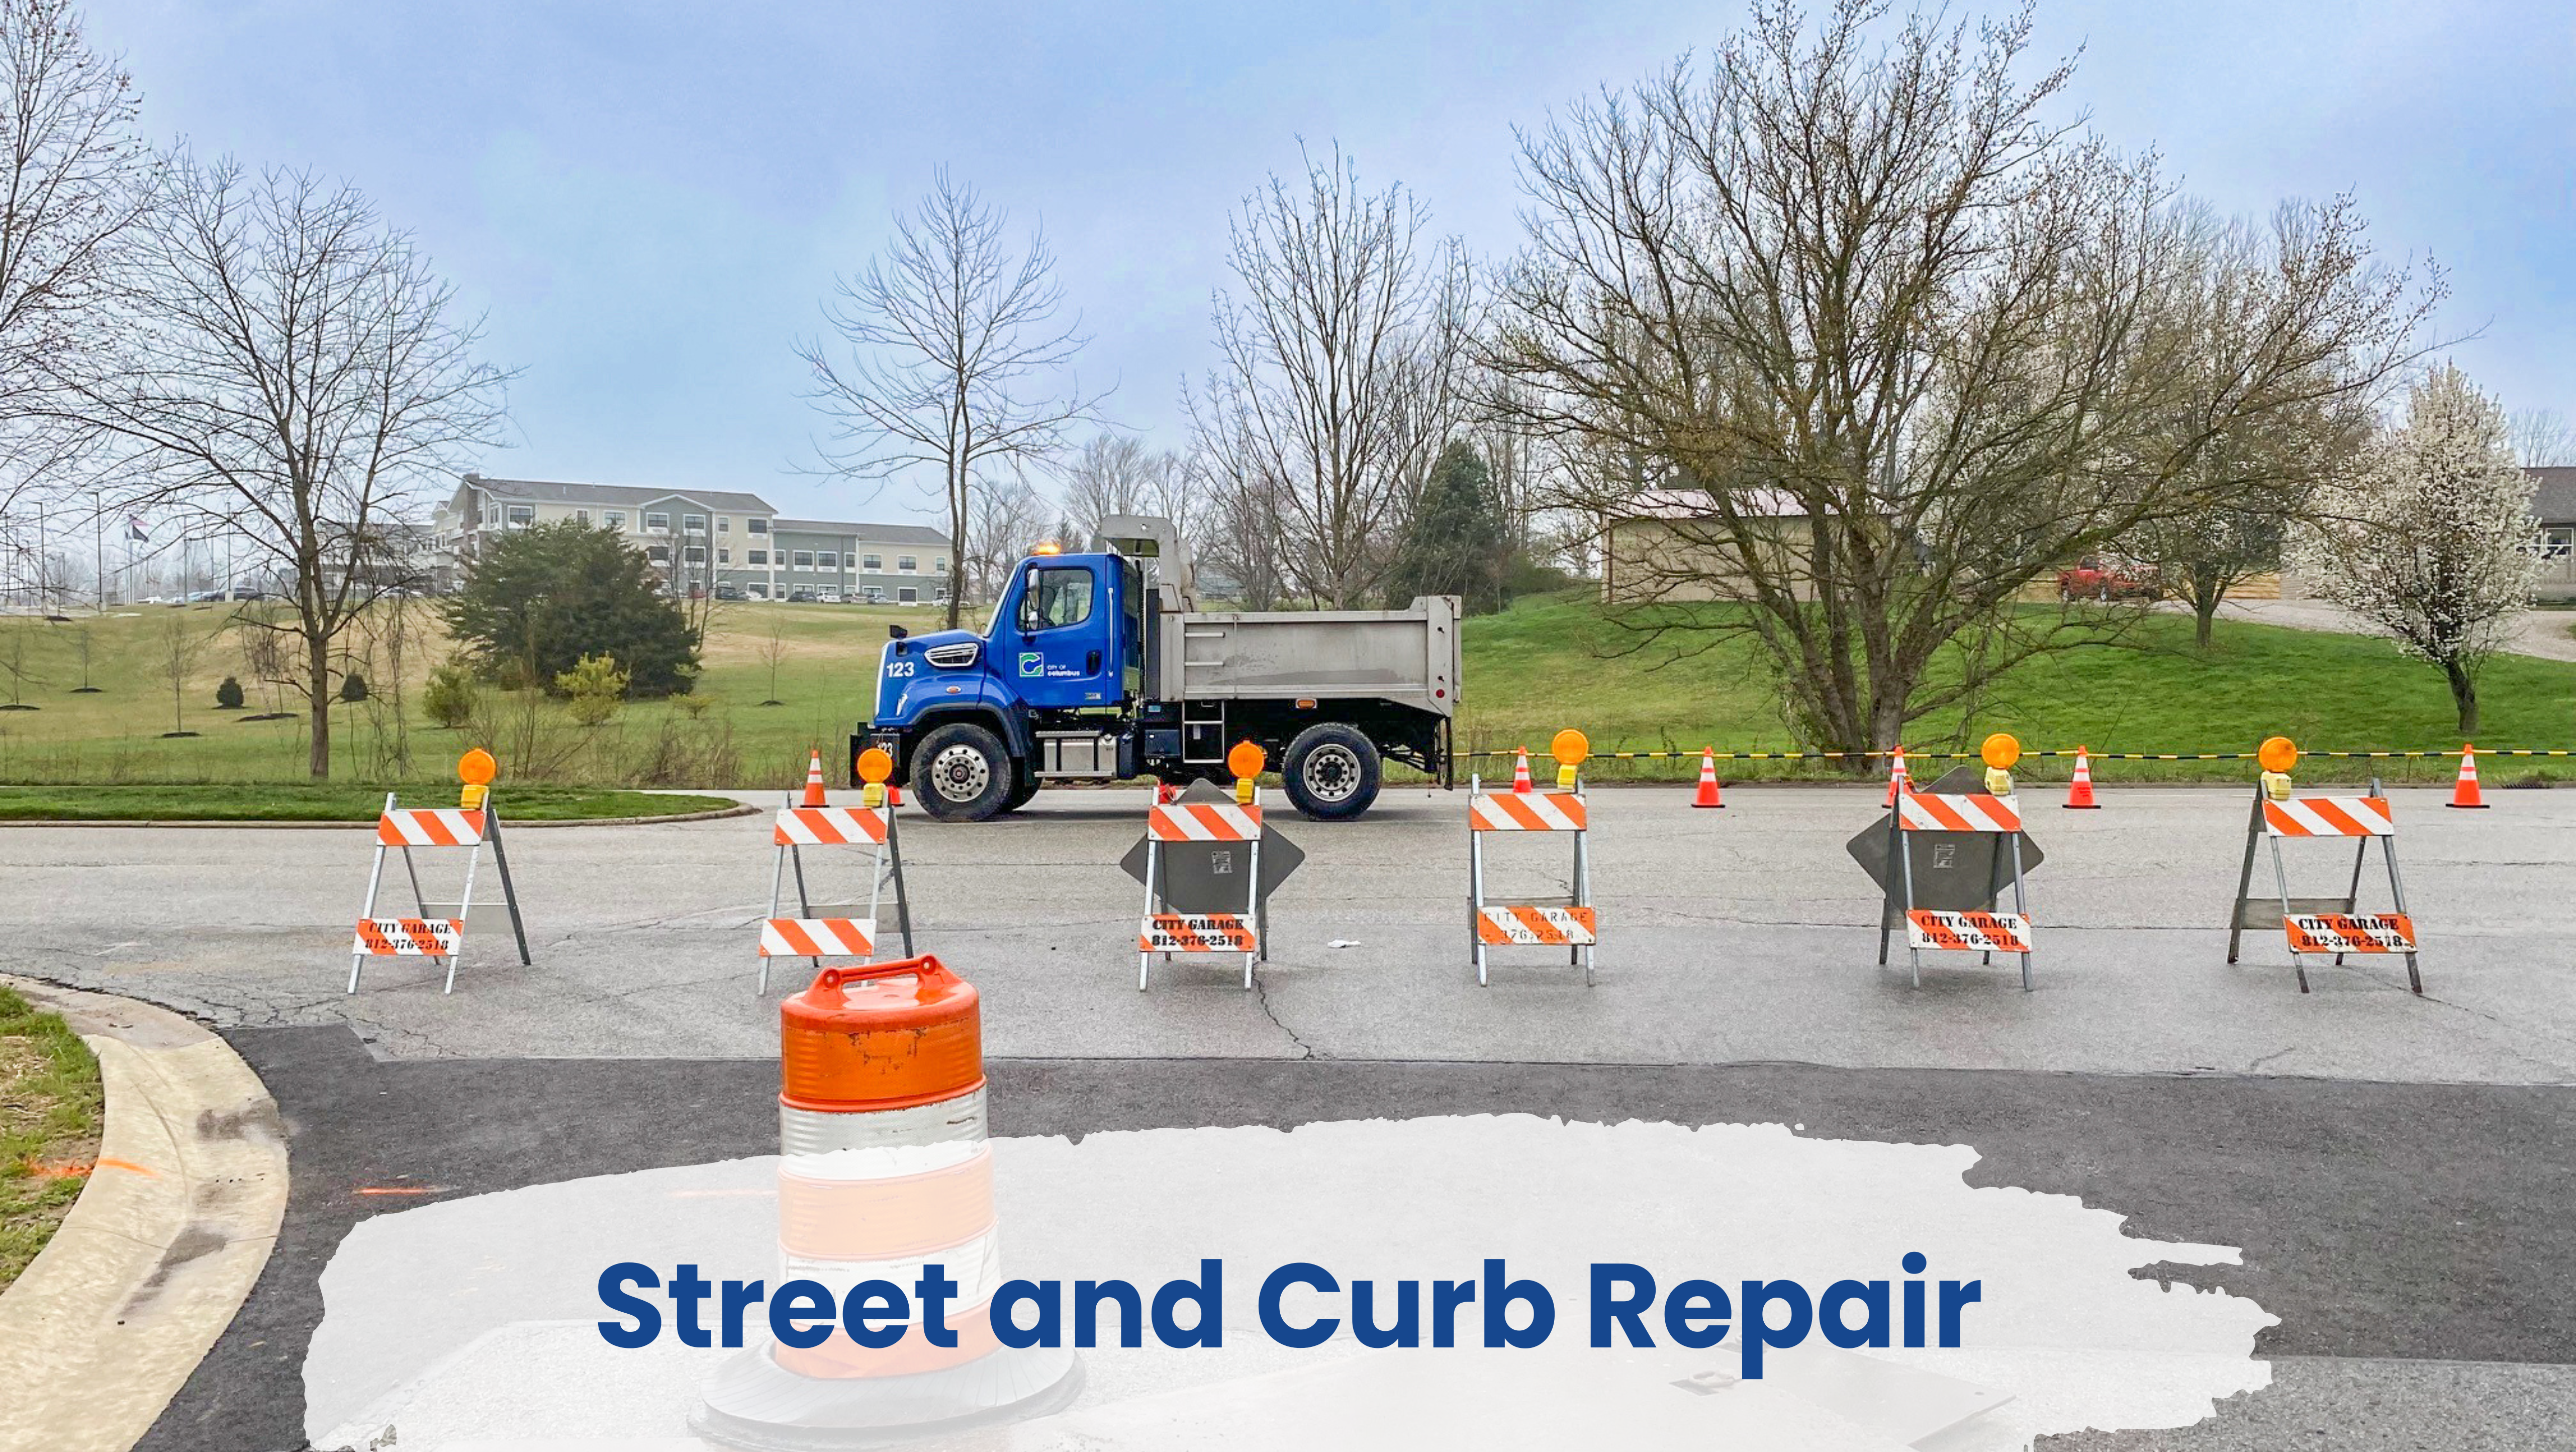 Repaired street and curb with DPW truck in background